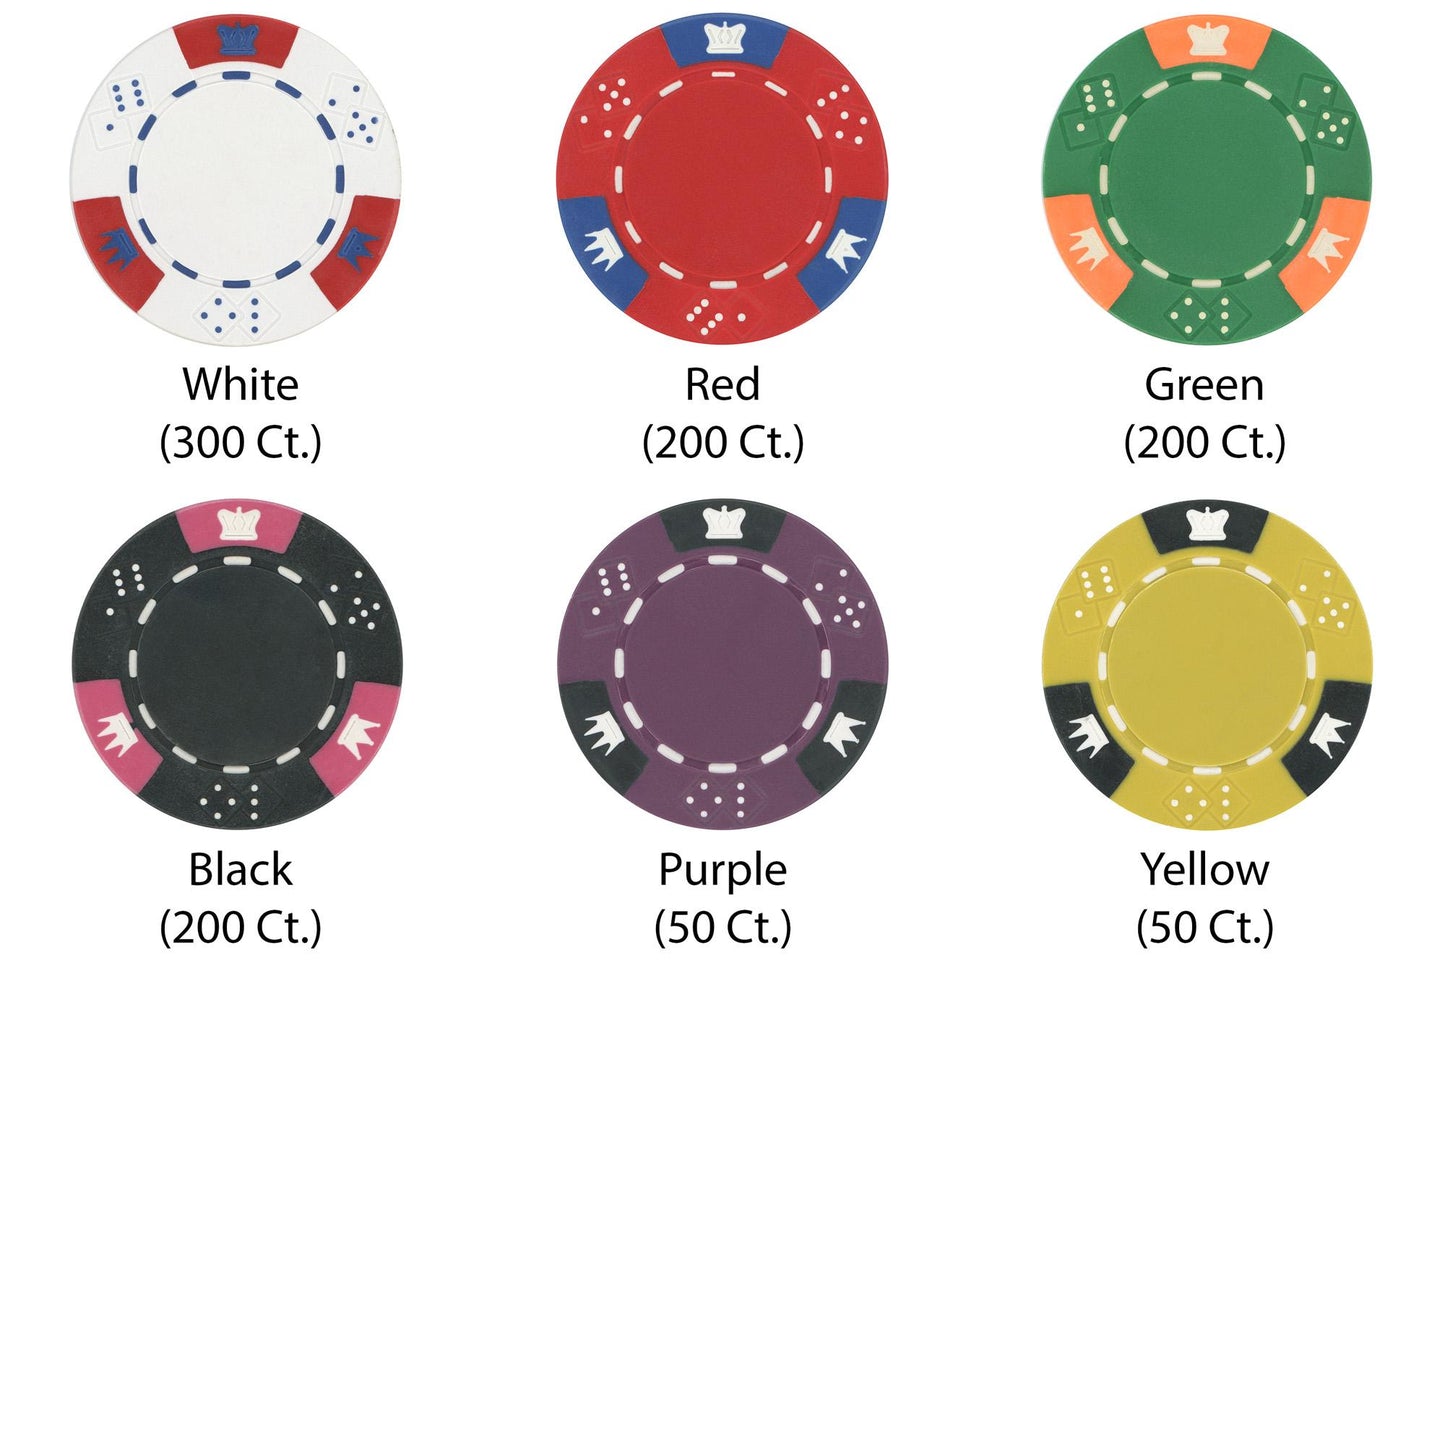 1000 Crown and Dice Poker Chips with Acrylic Carrier